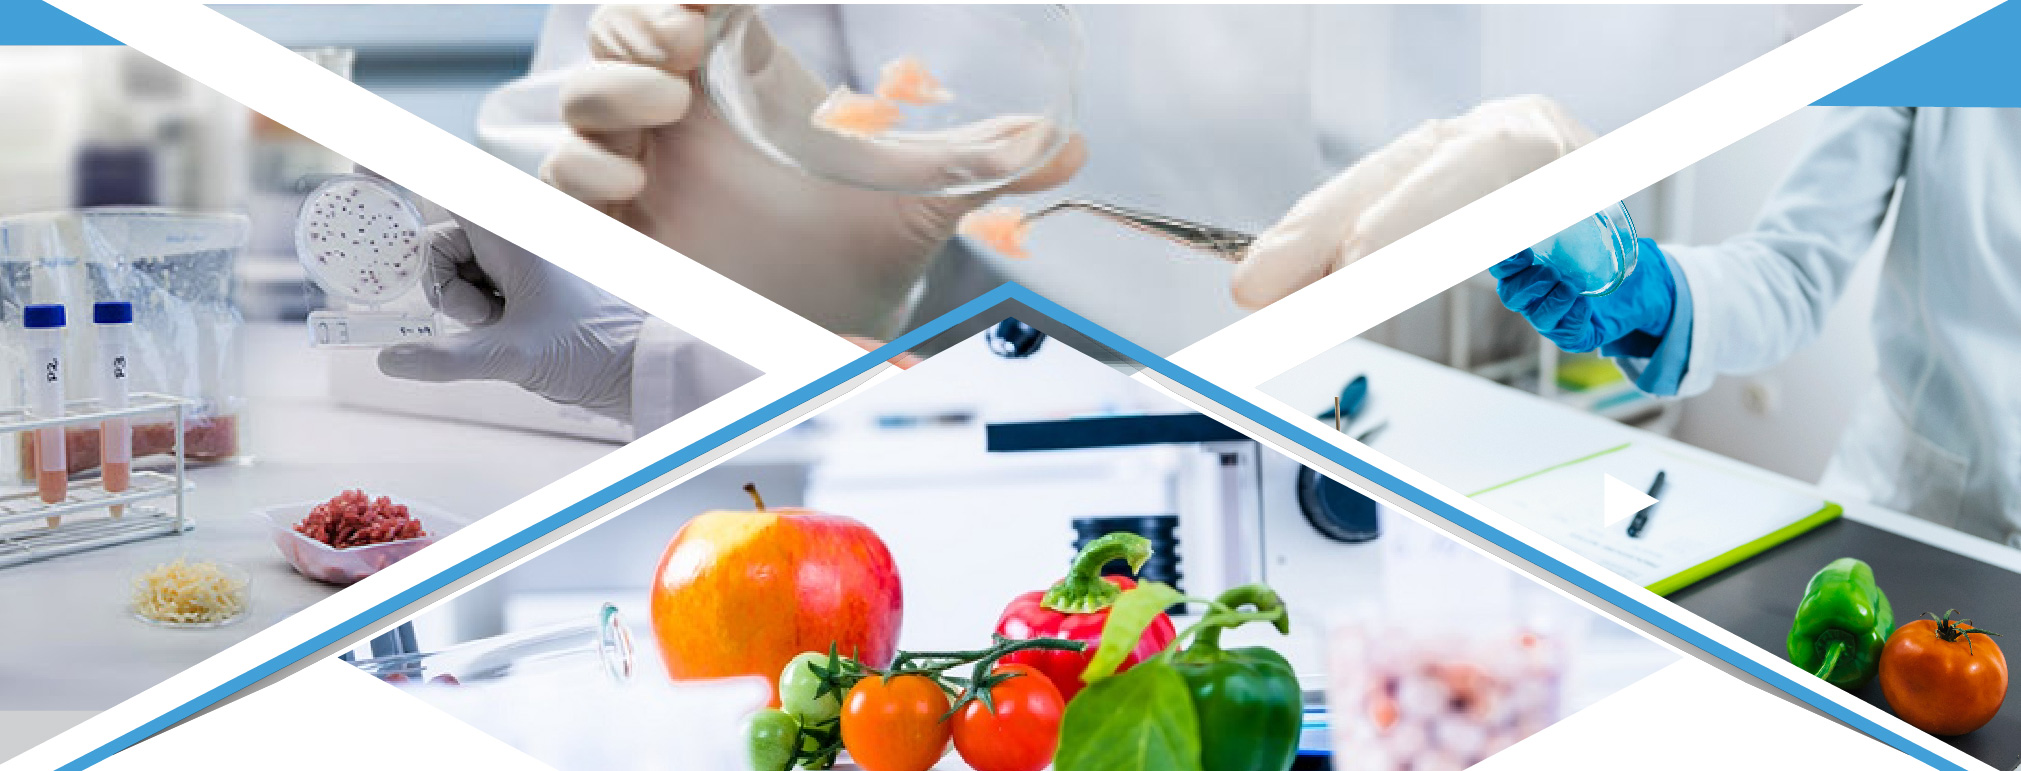 research and innovation in food science and technology